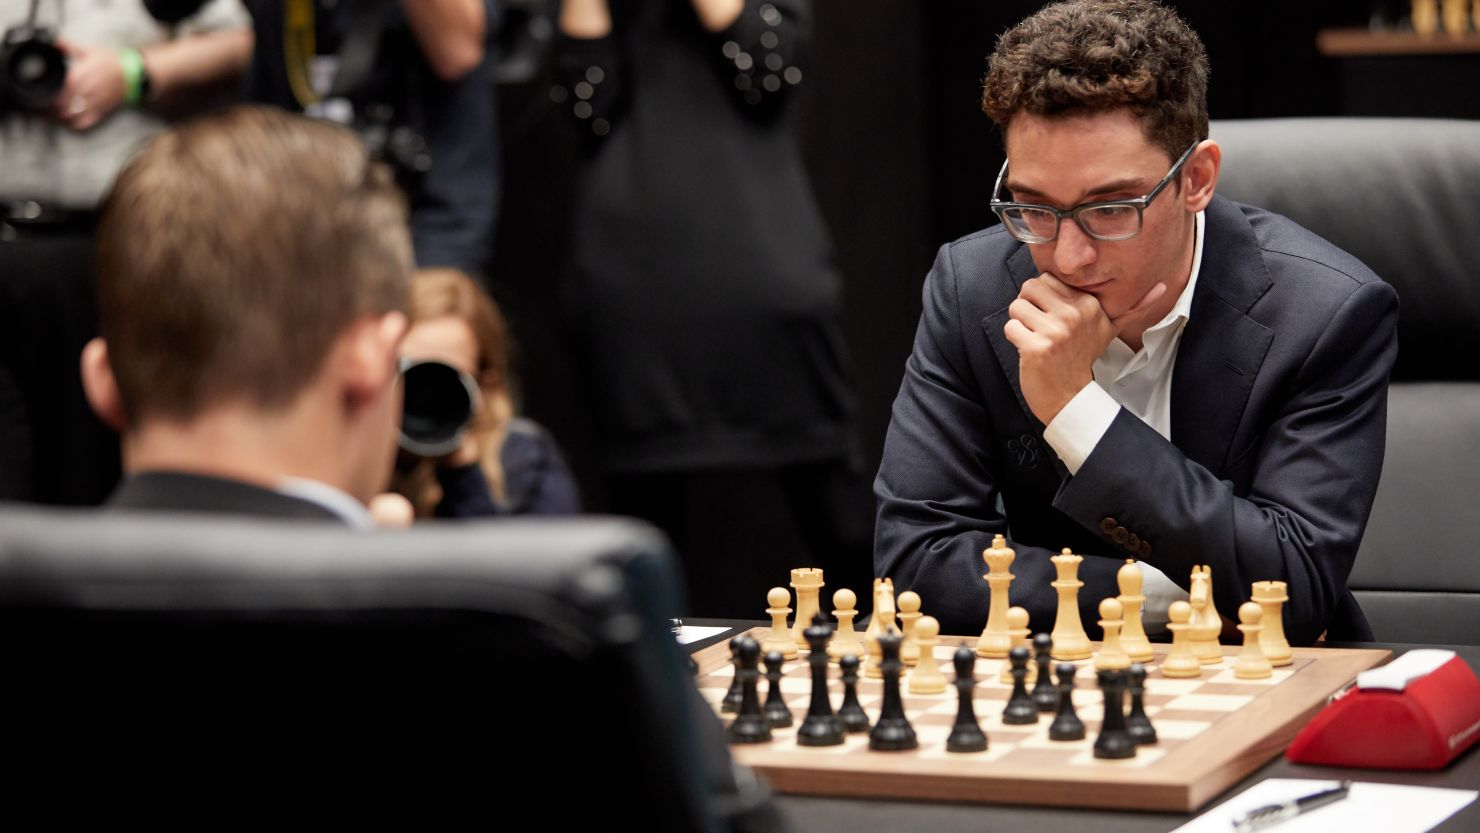 Caruana (right) plays world champion Carlsen over 12 matches in London this month.